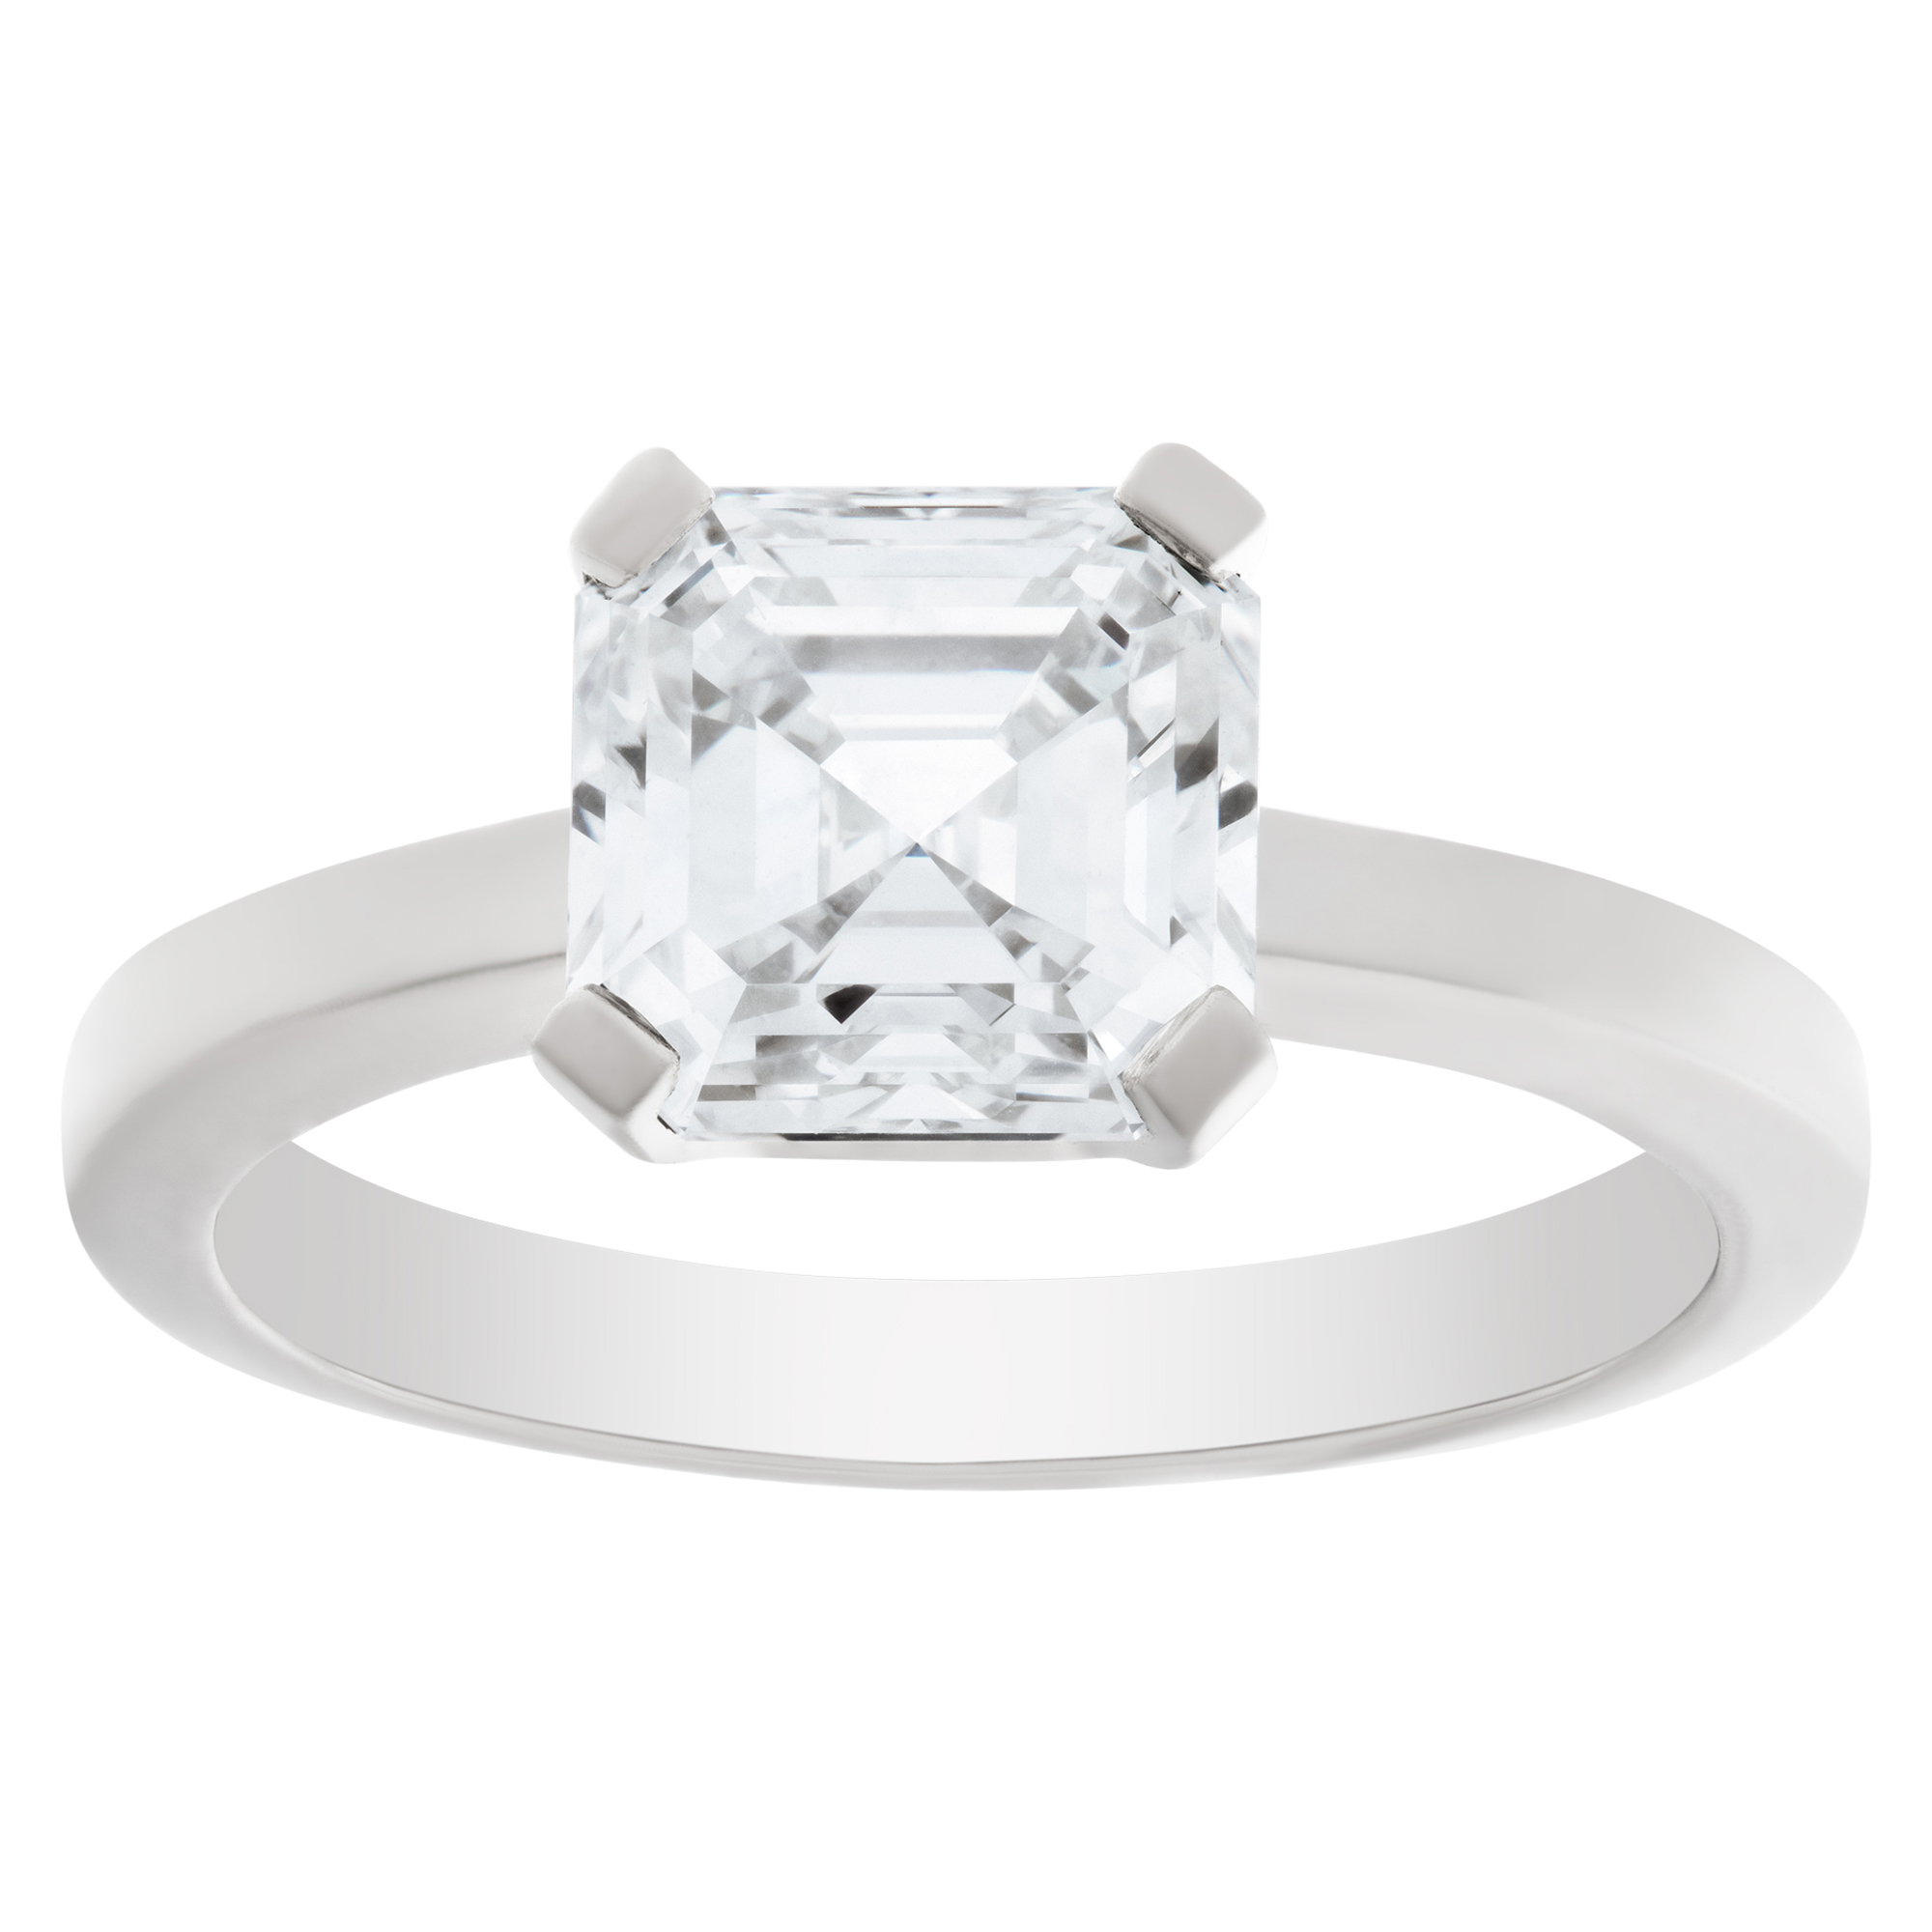 GIA certified  Asscher cut diamond 2.05 carat (I color, VS1 clarity) solitaire ring in platinum image 1